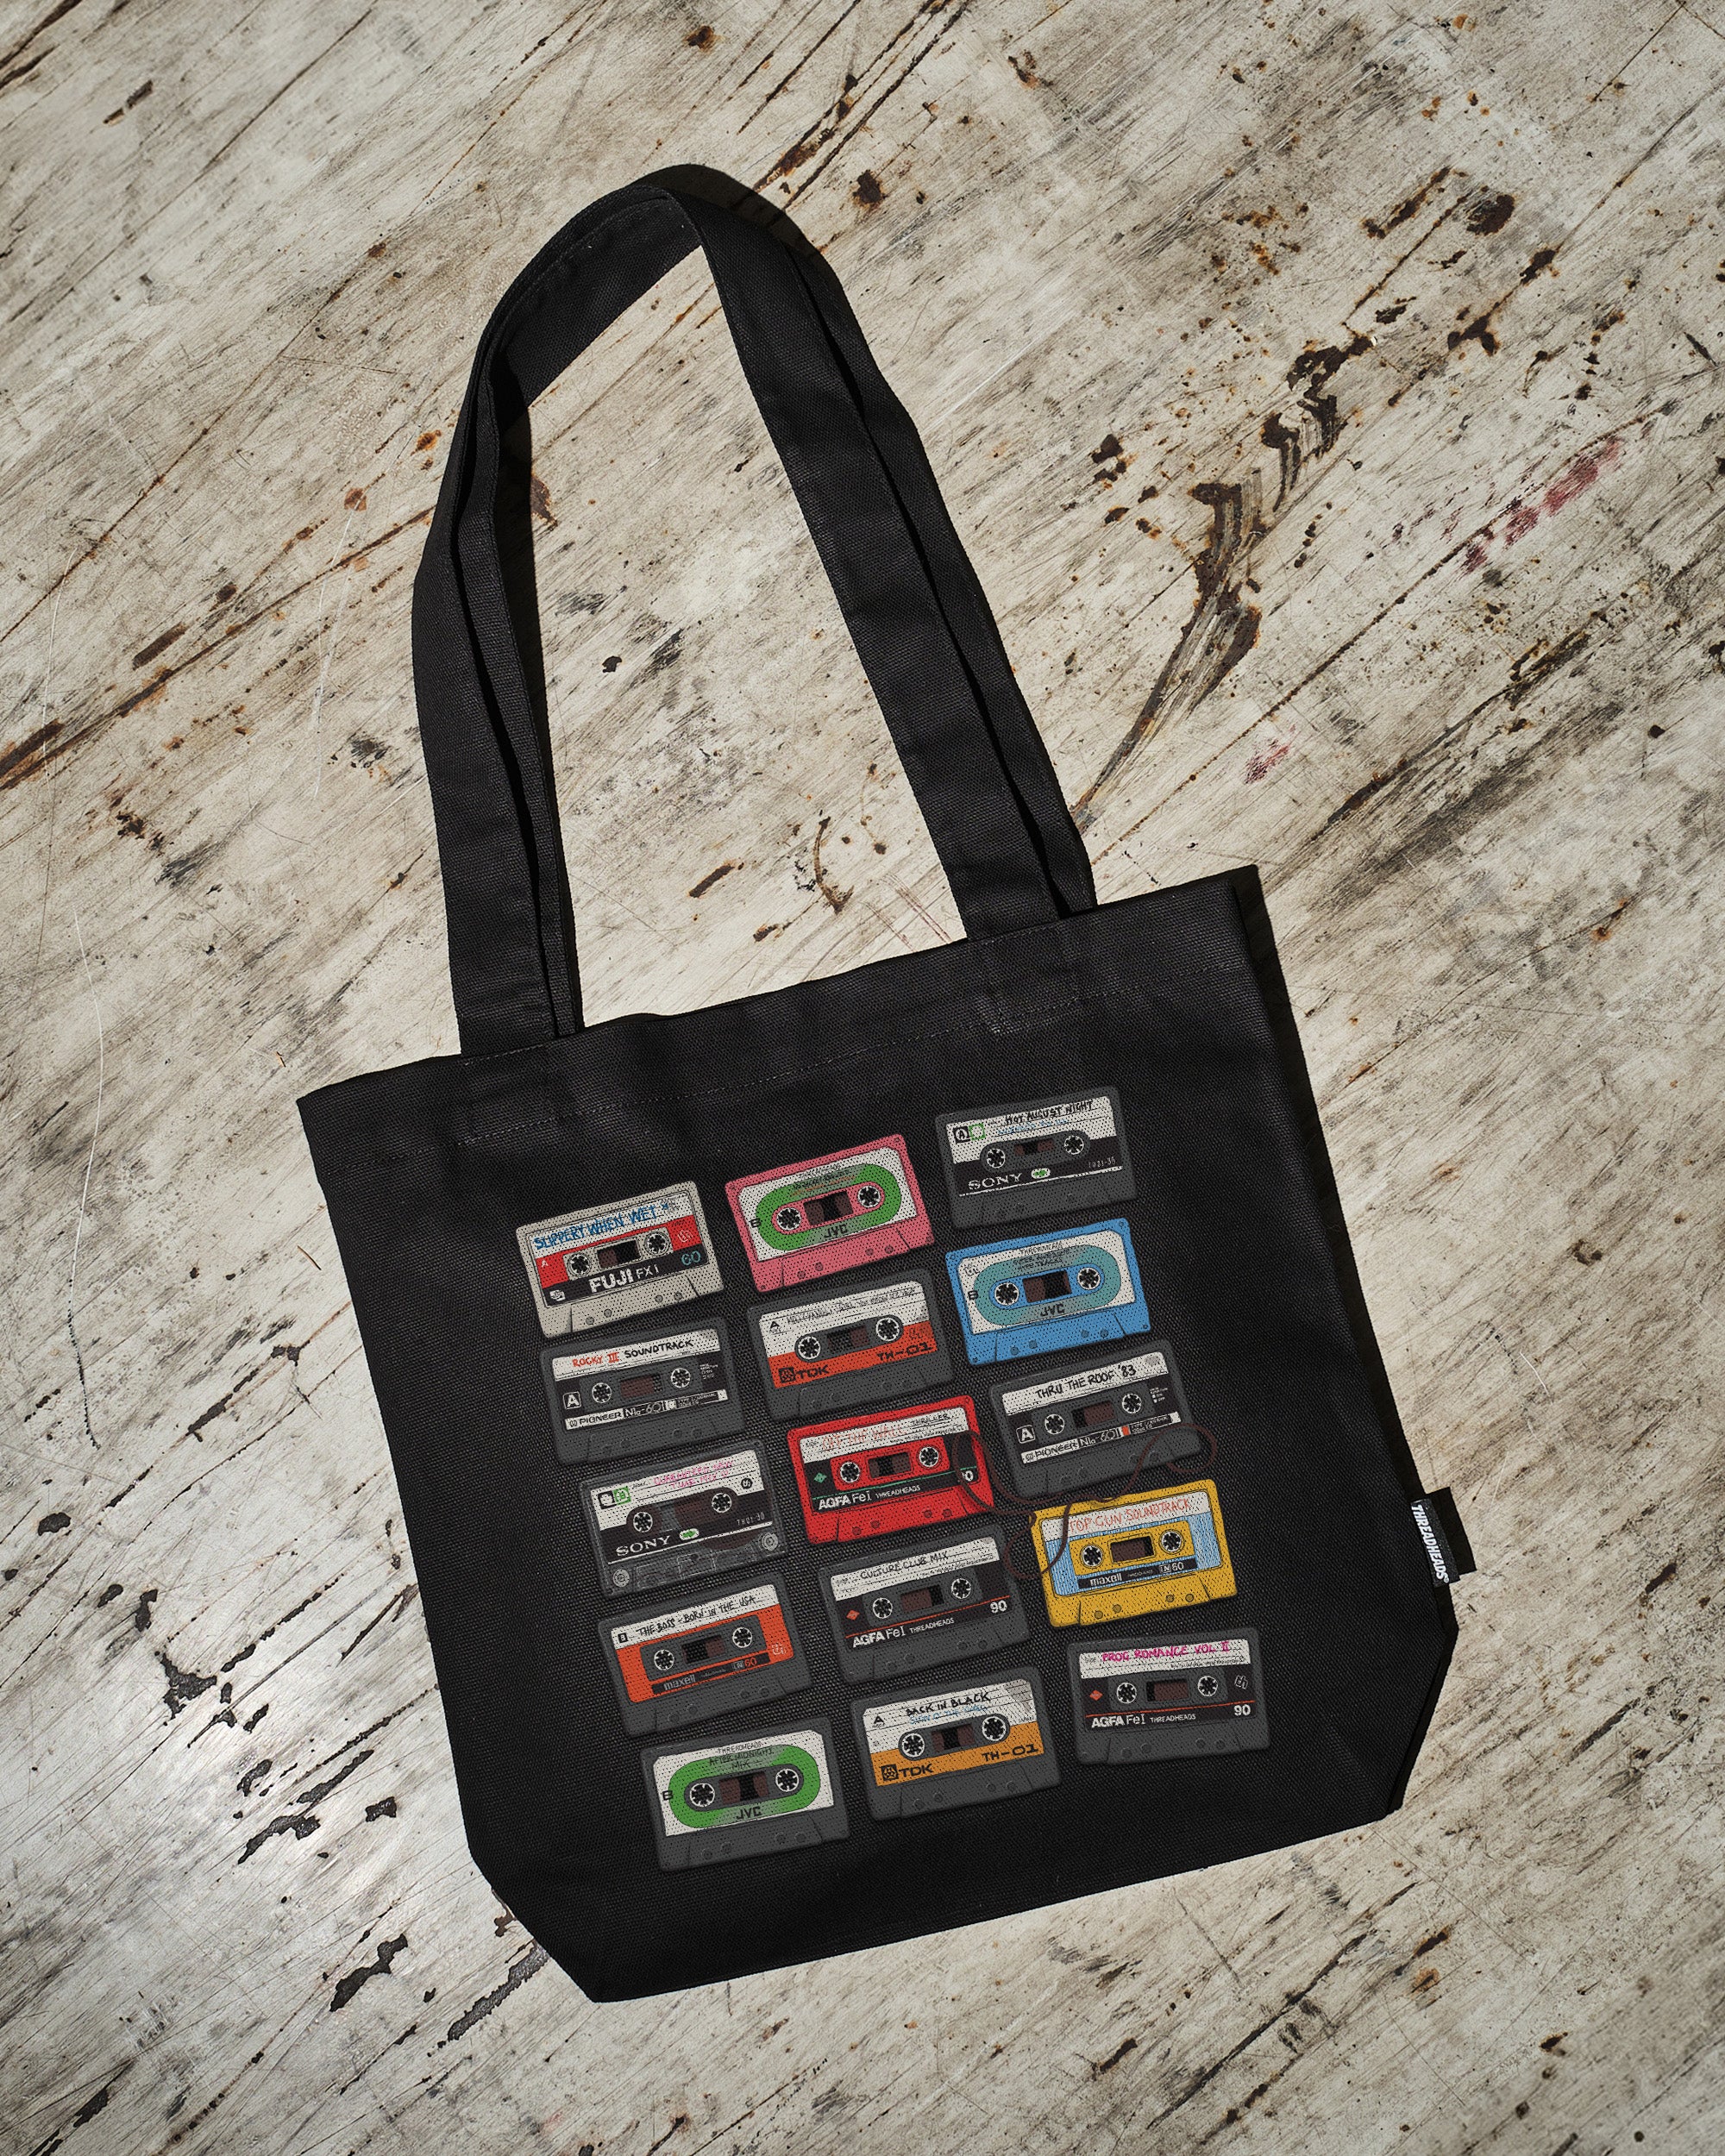 Cassette Tapes Tote Bag